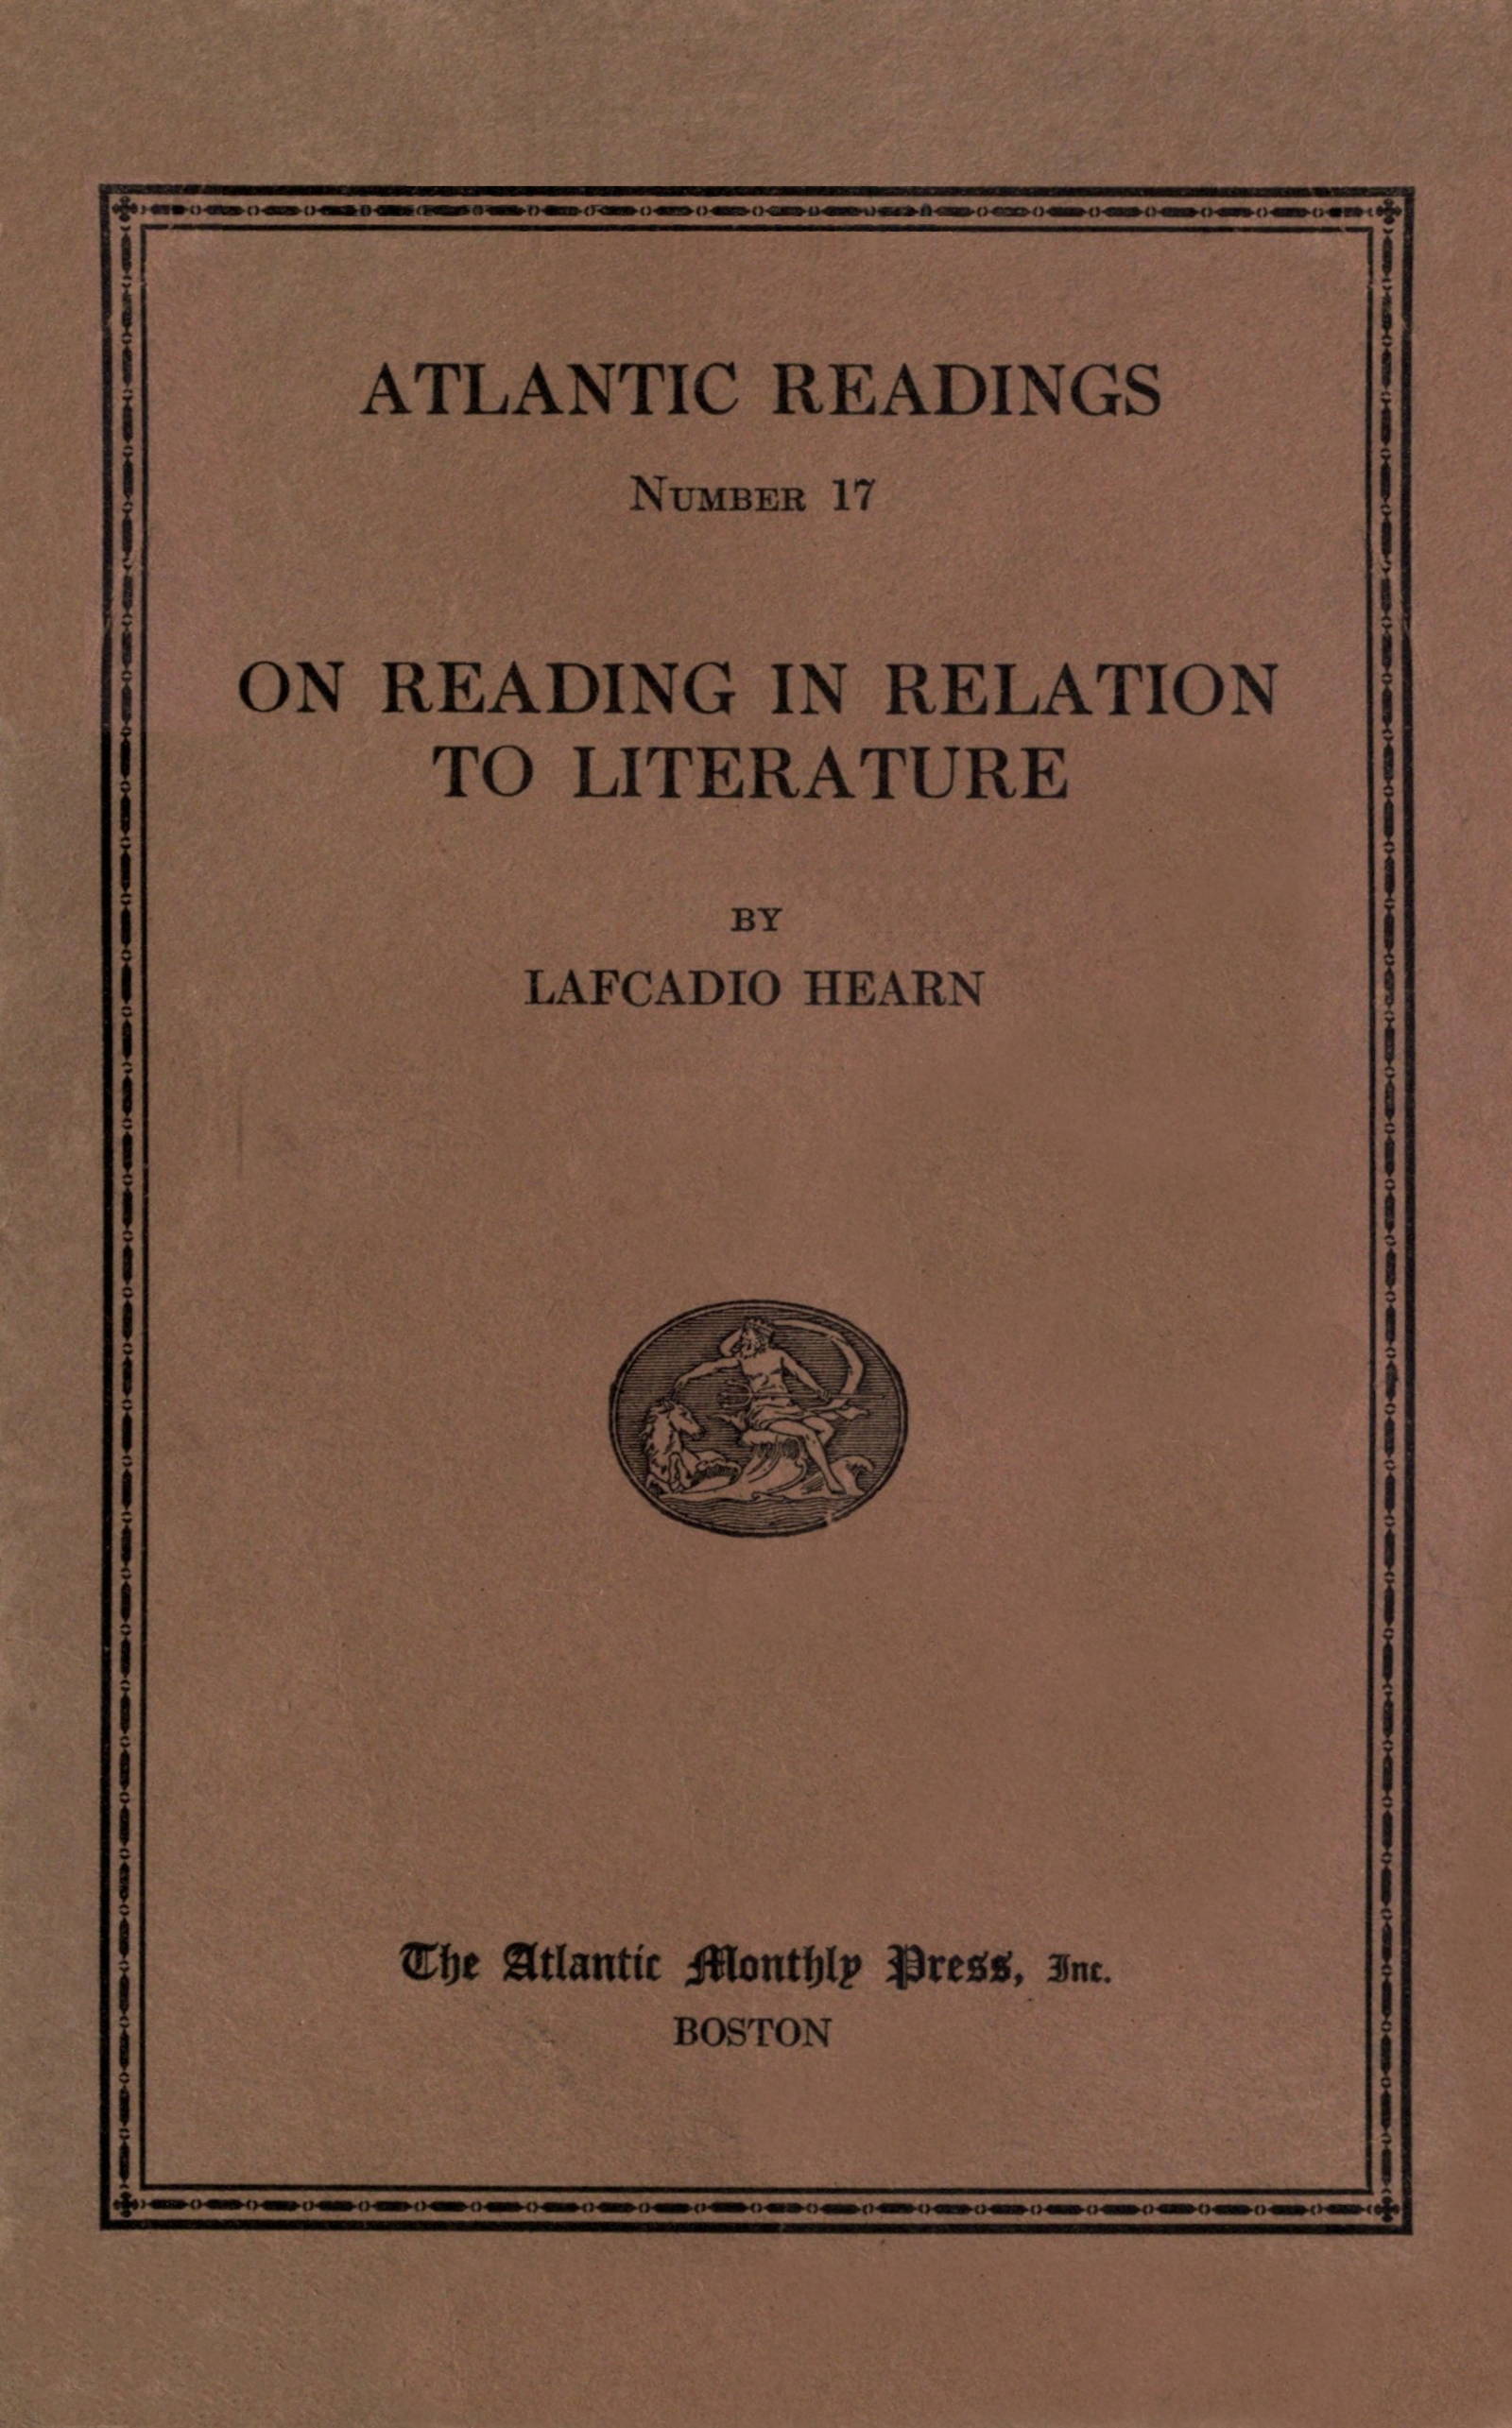 On reading in relation to literature